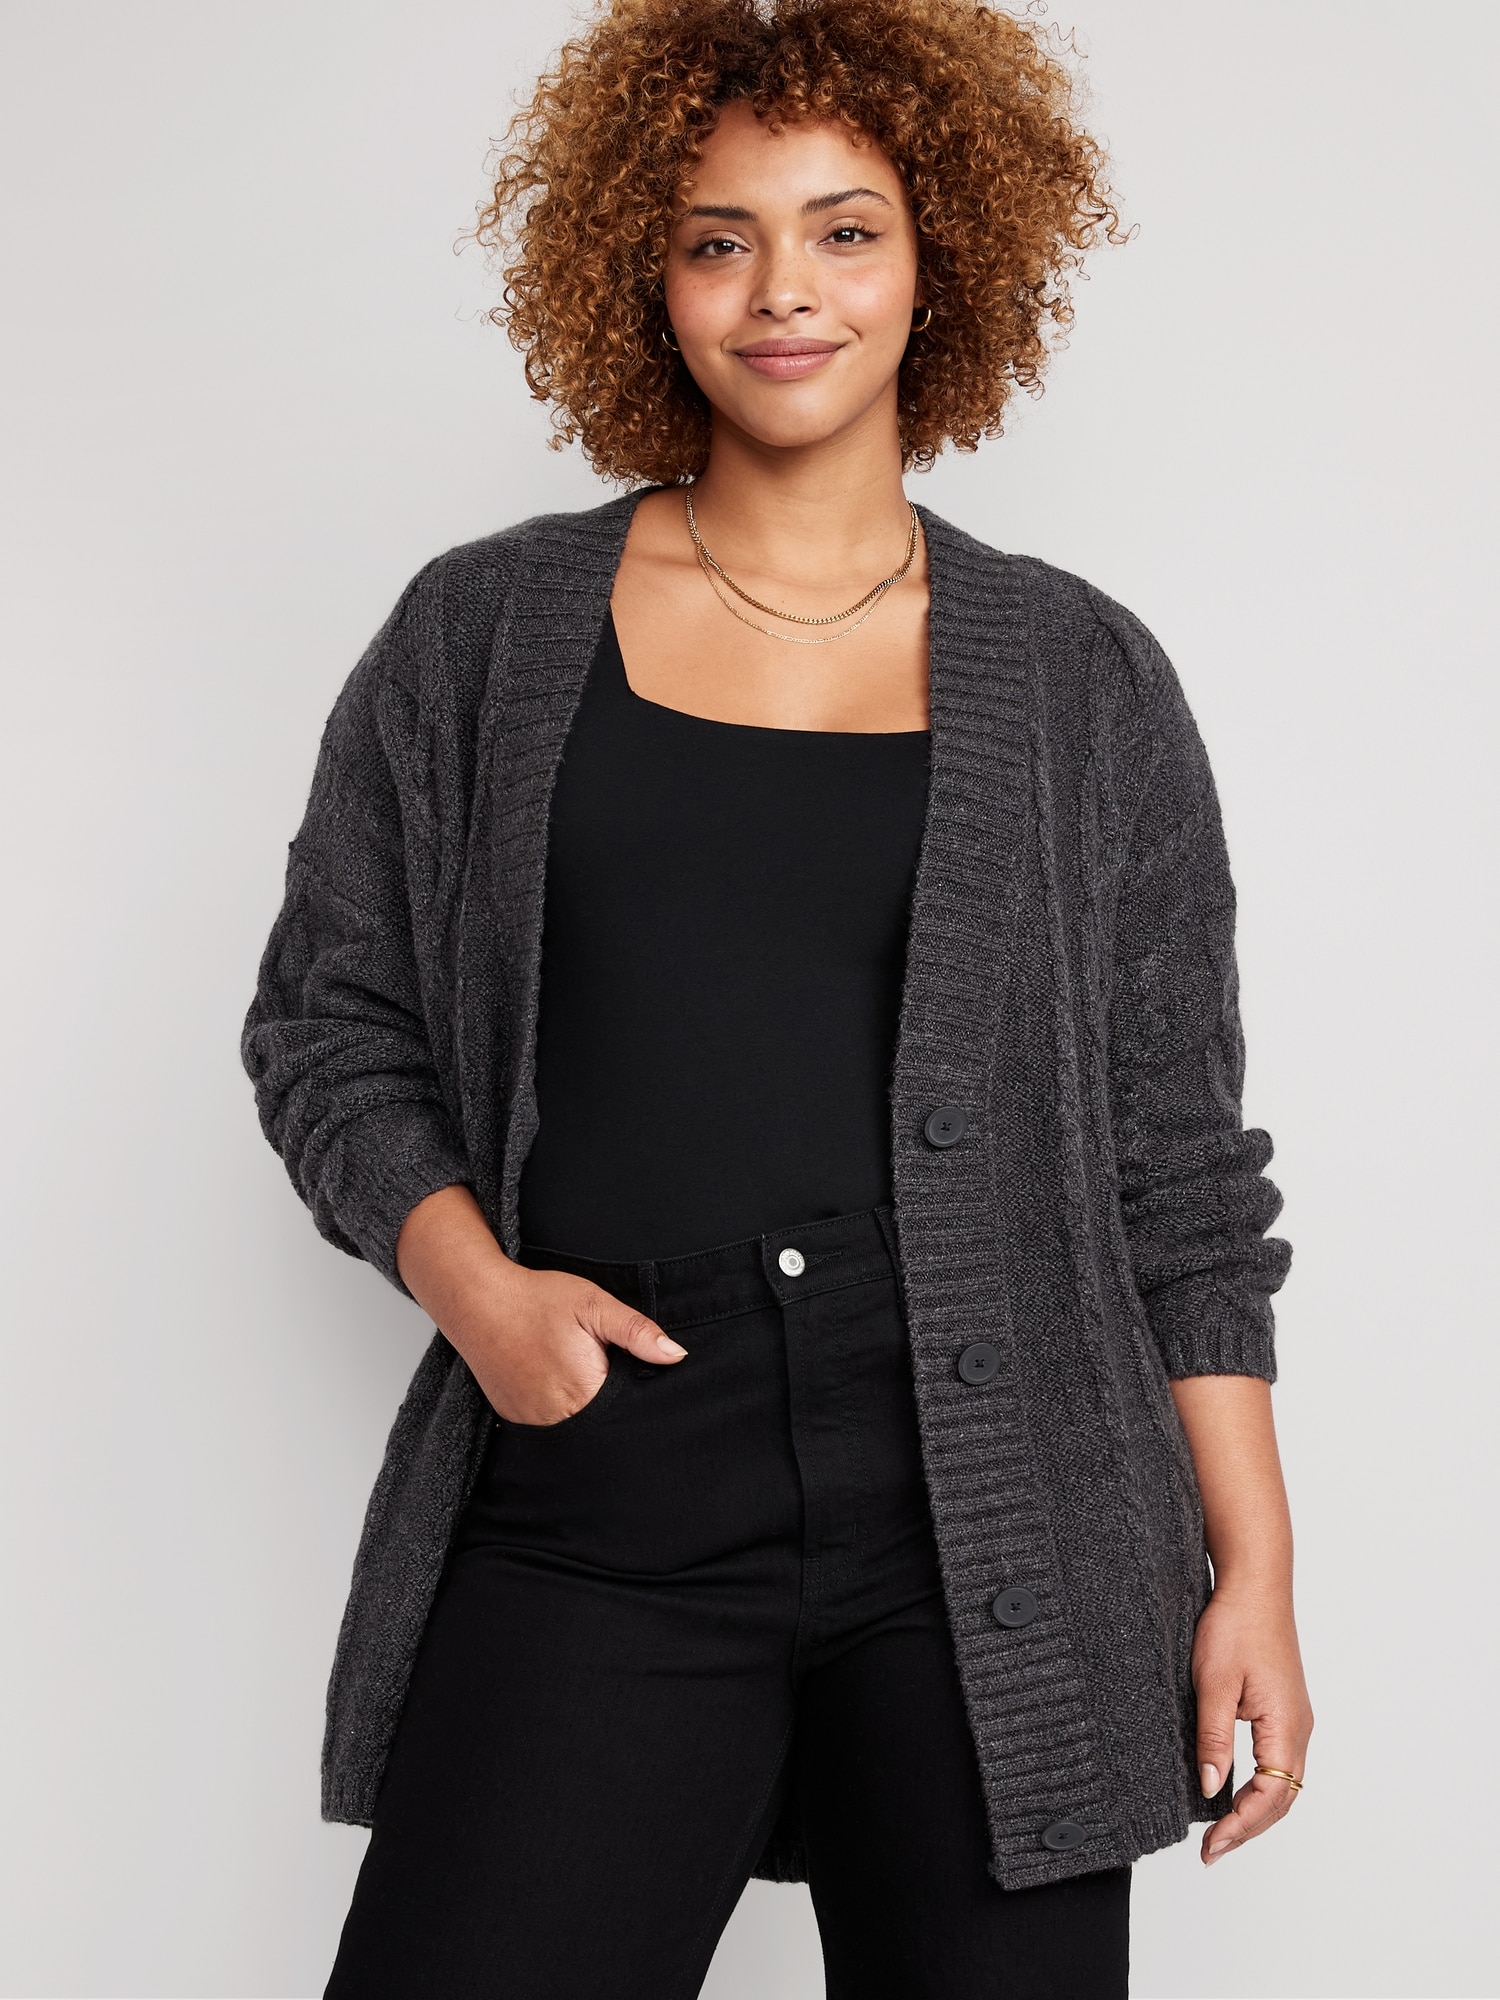 for Oversized Cable-Knit Navy Old Women | Chunky Cardigan Sweater